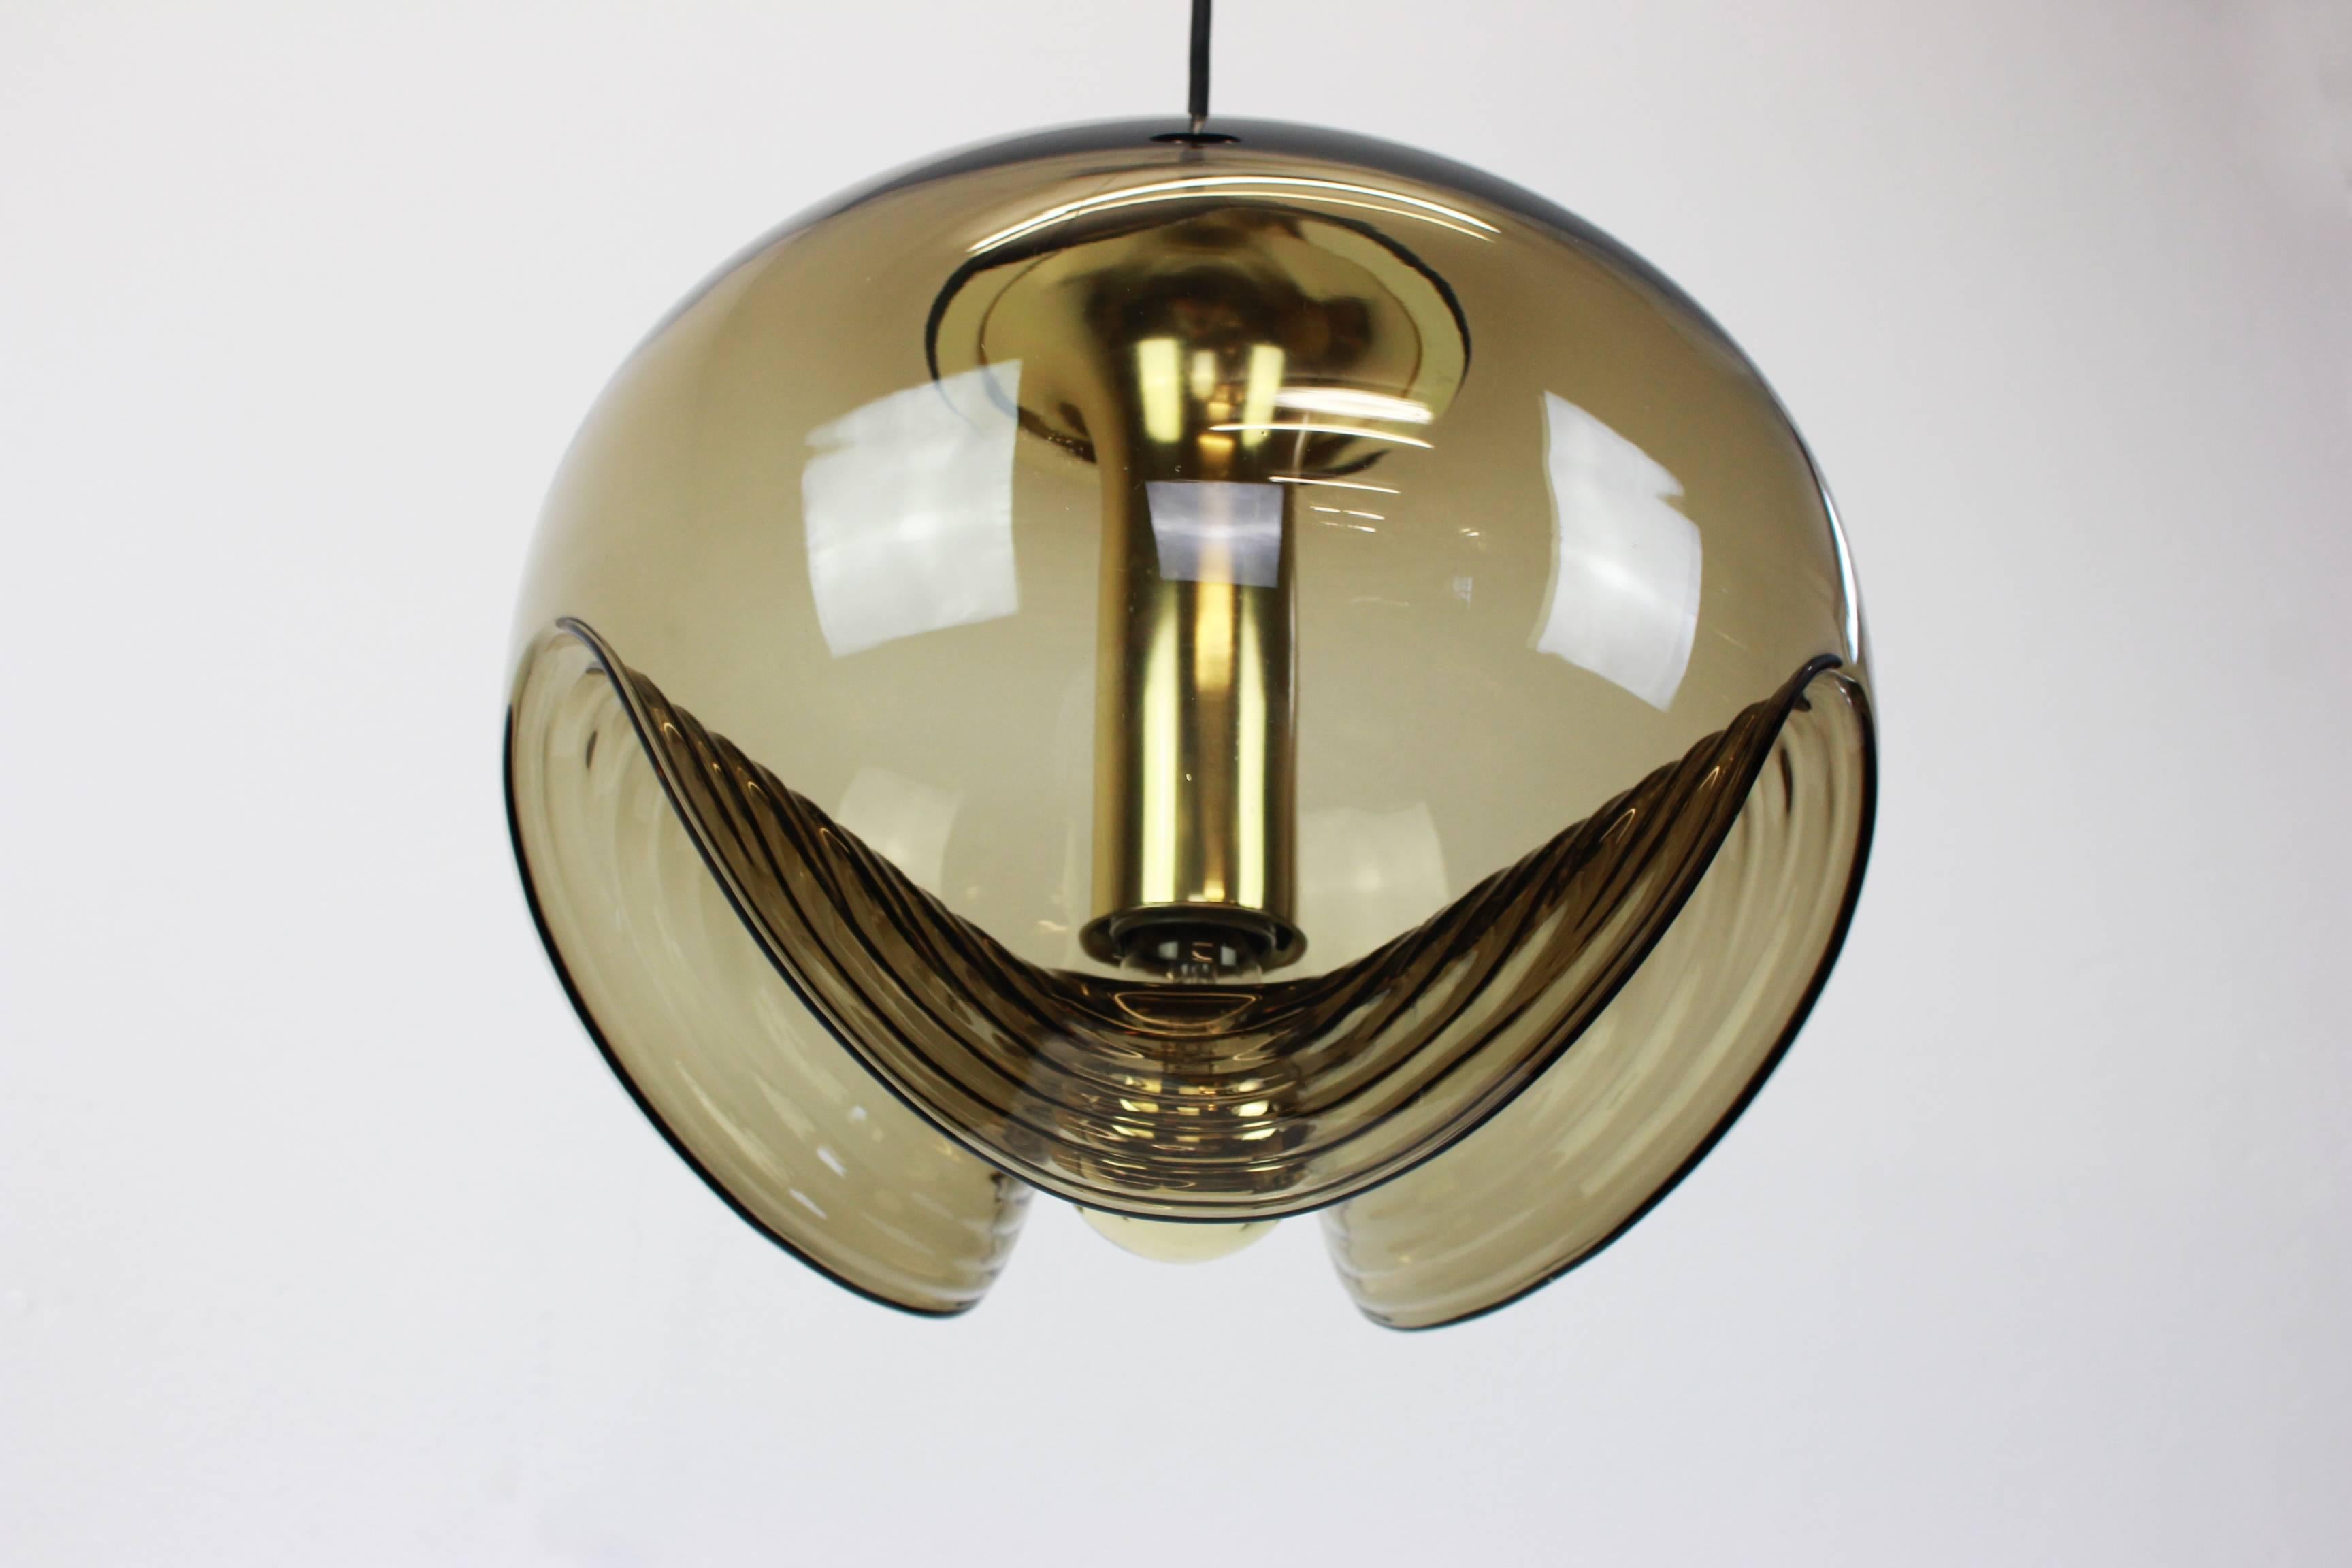 A special round Biomorphic smoked glass pendant designed by Koch & Lowy for Peill & Putzler, manufactured in Germany, circa 1970s.

High quality and in very good condition. Cleaned, well-wired and ready to use. 

Each fixture requires 1 x E27